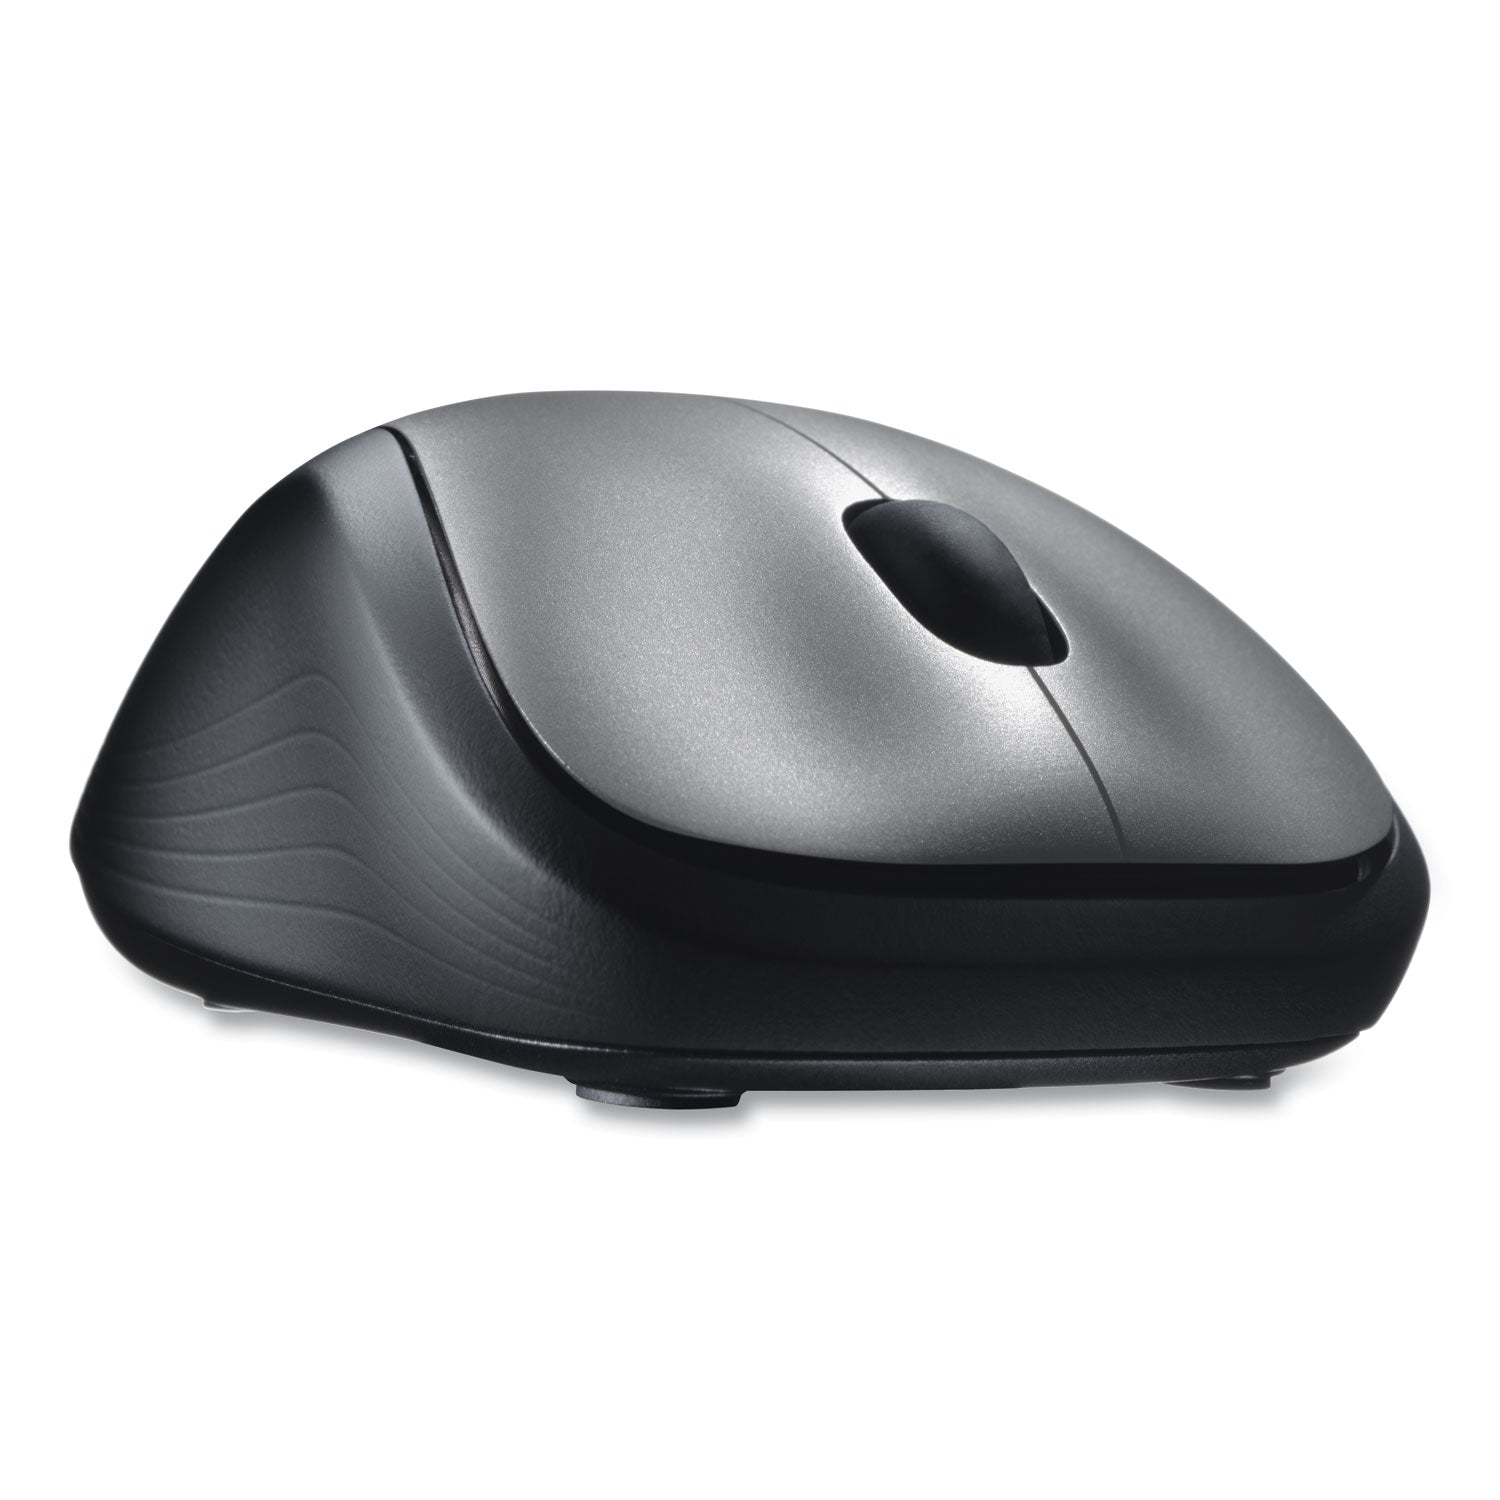 M310 Wireless Mouse, 2.4 GHz Frequency/30 ft Wireless Range, Left/Right Hand Use, Silver/Black - 